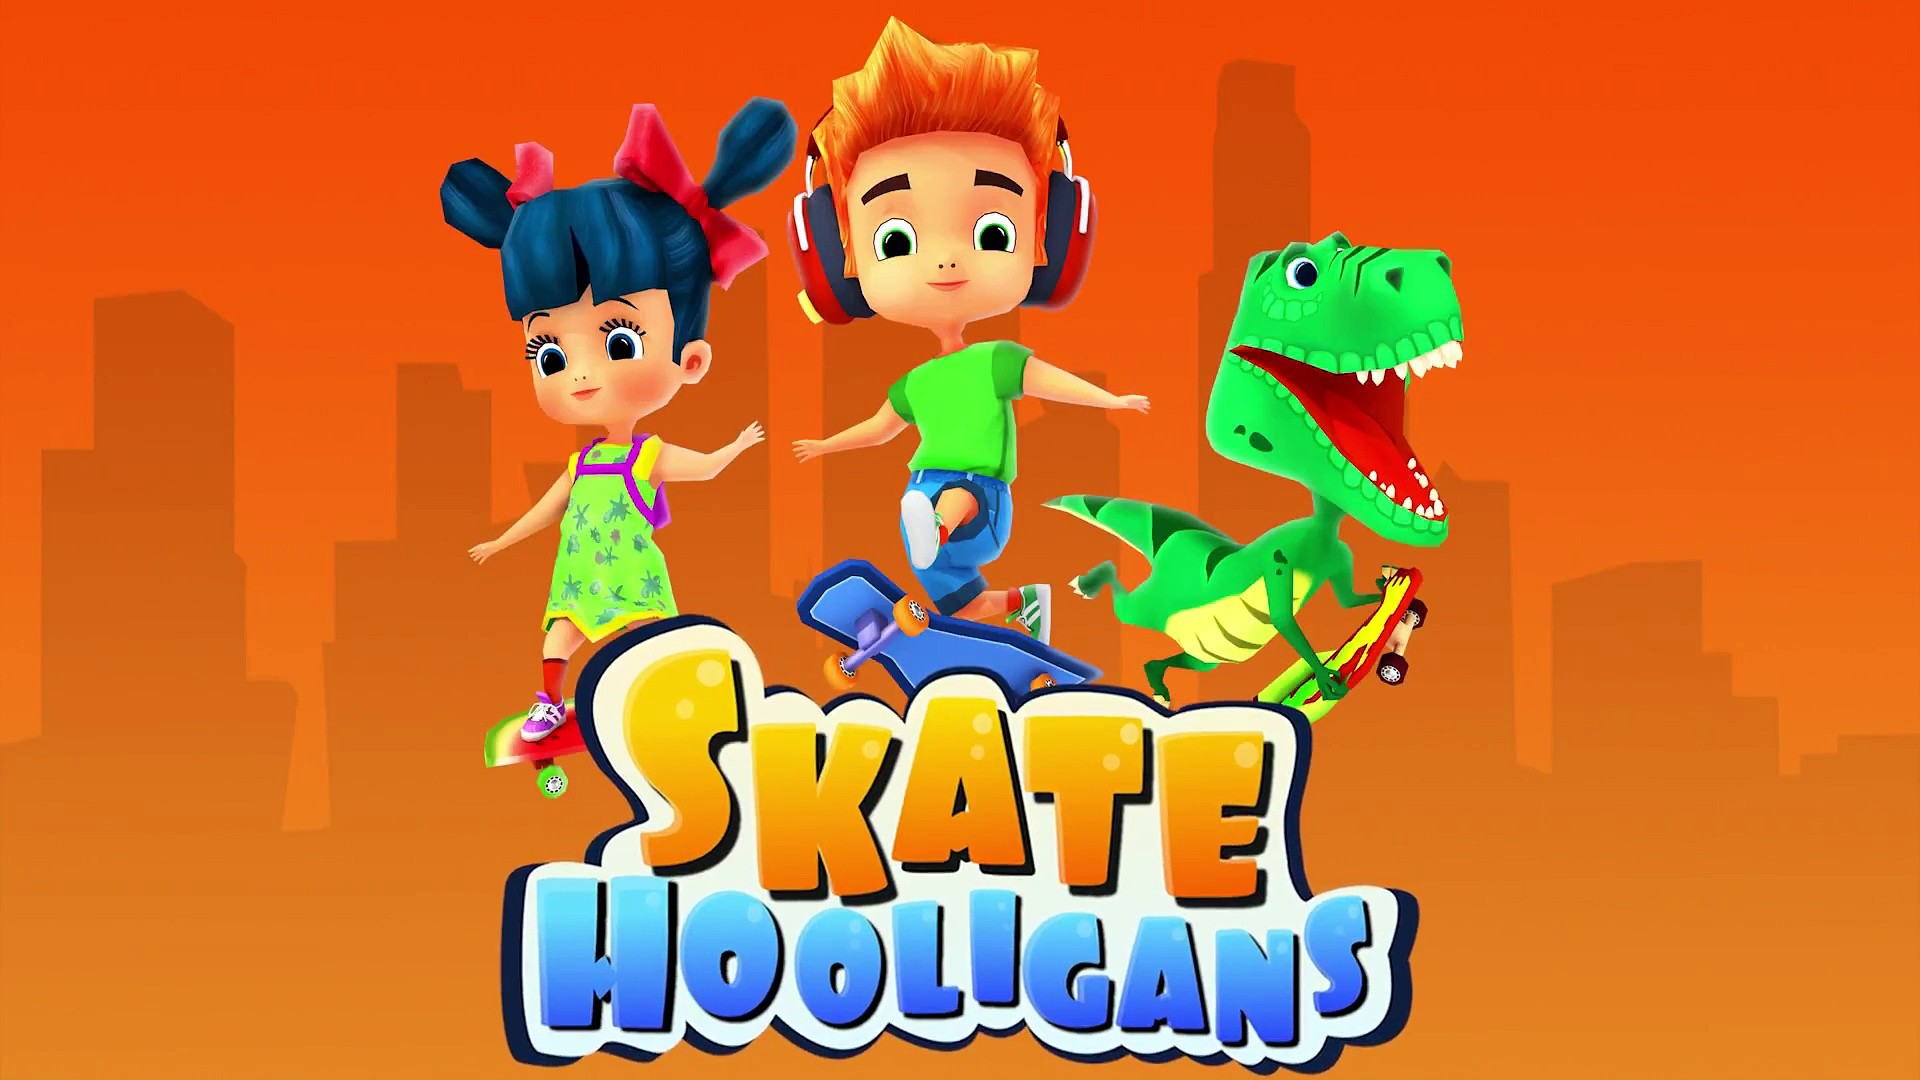 1920x1080 Skate Hooligans: A new look of subway surfers on web